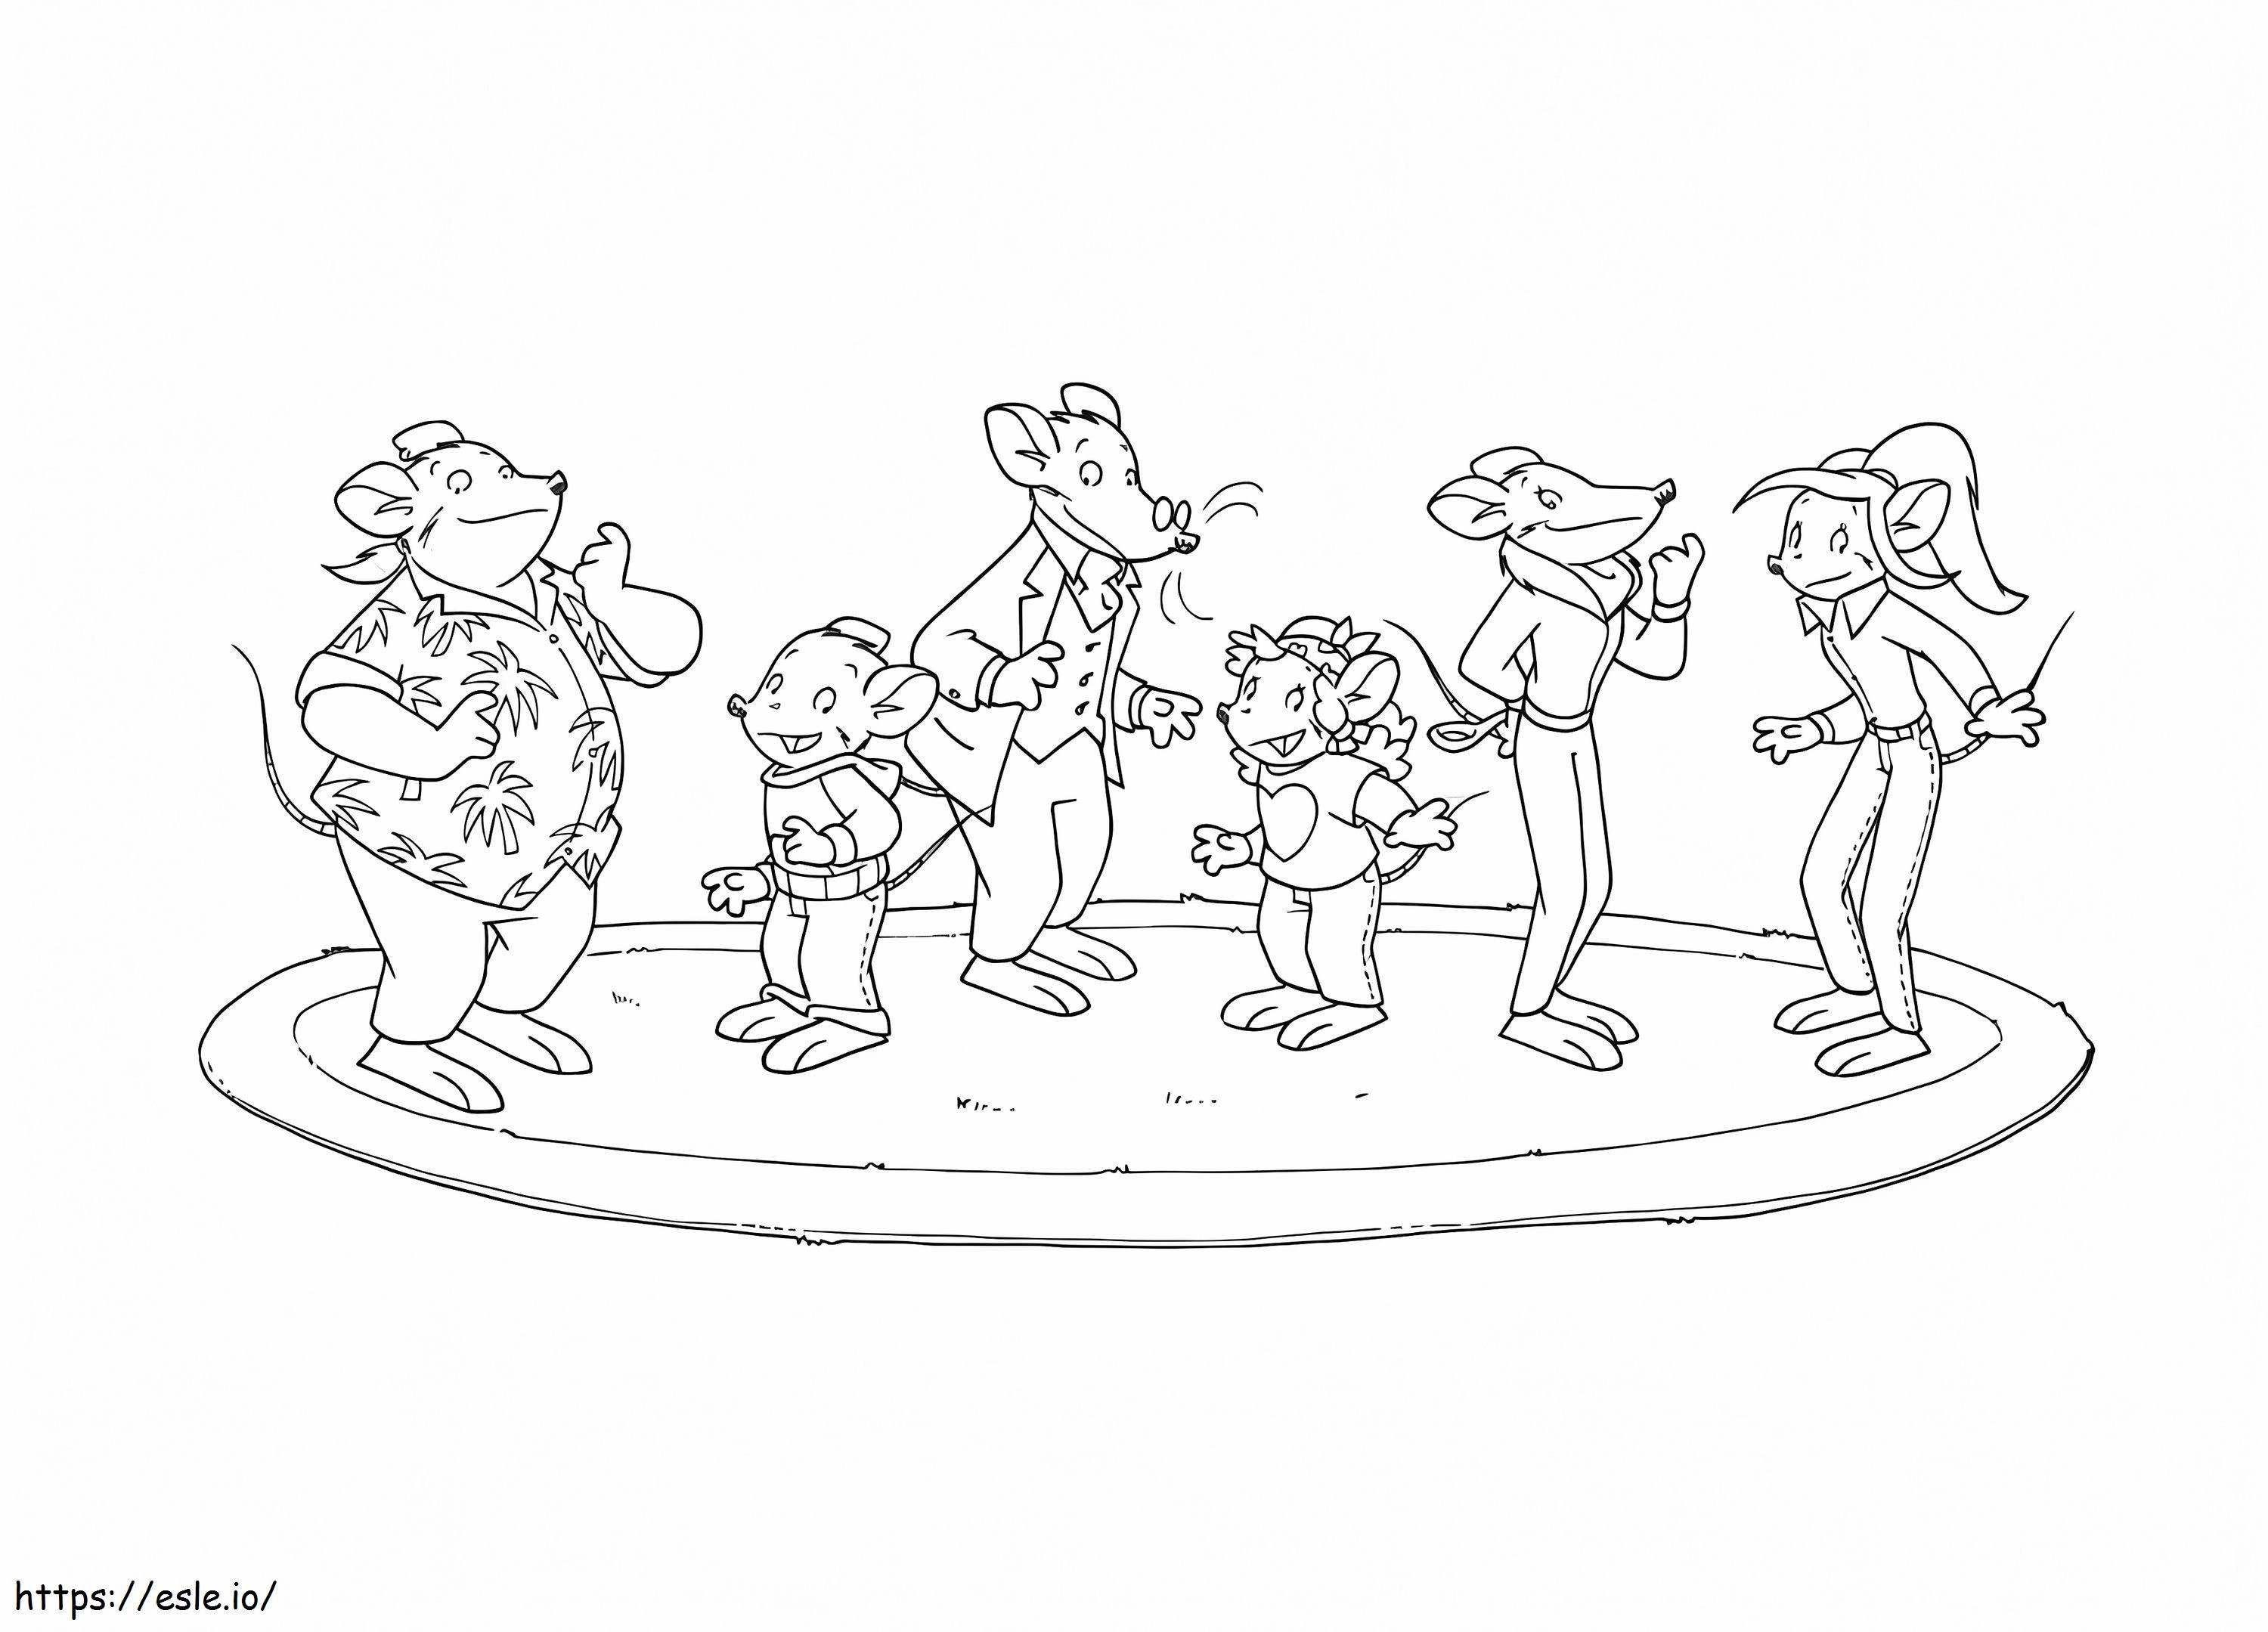 Characters From Geronimo Stilton coloring page